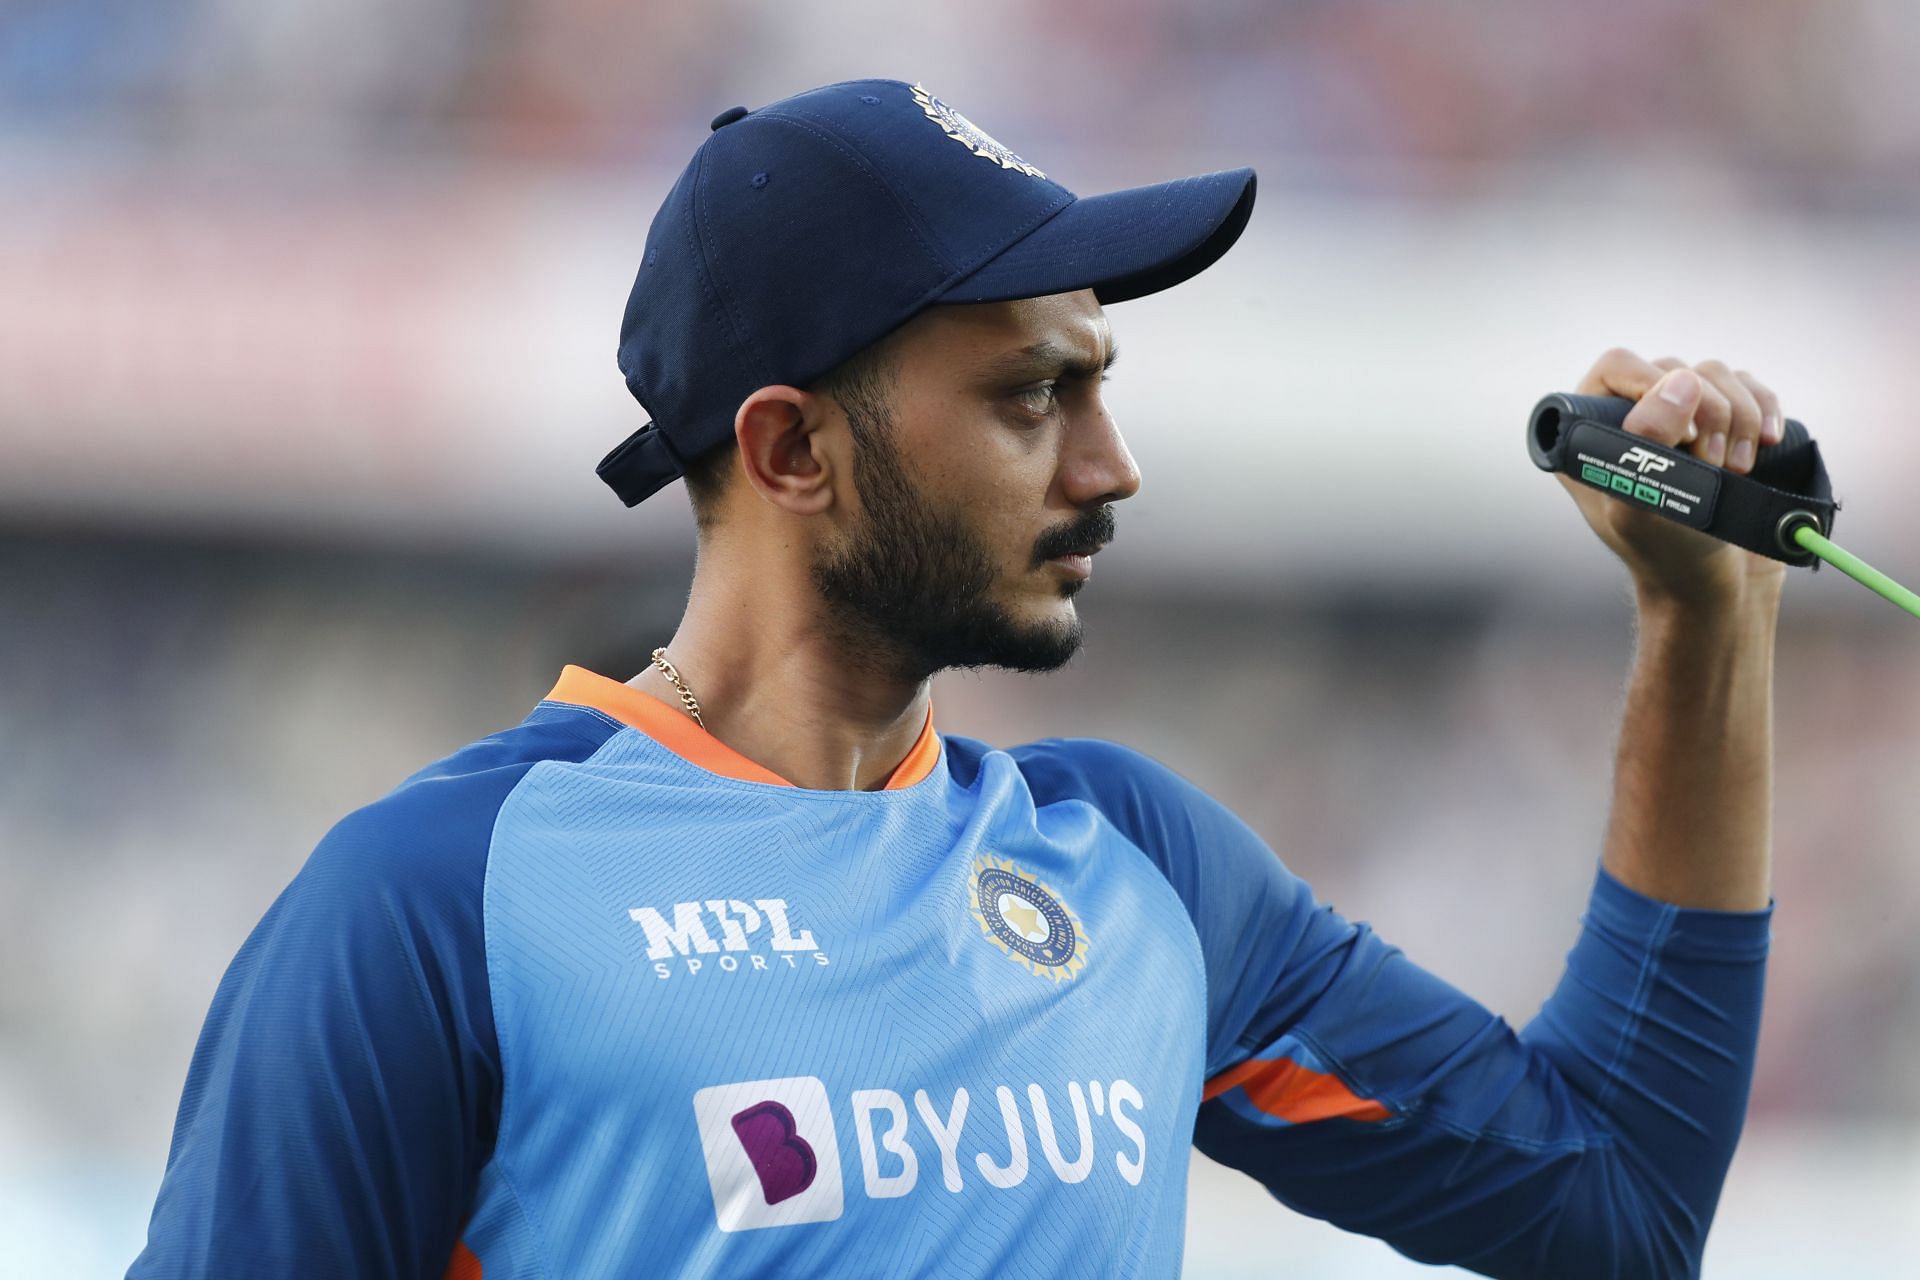 Axar Patel has made an impressive start to the series with the ball